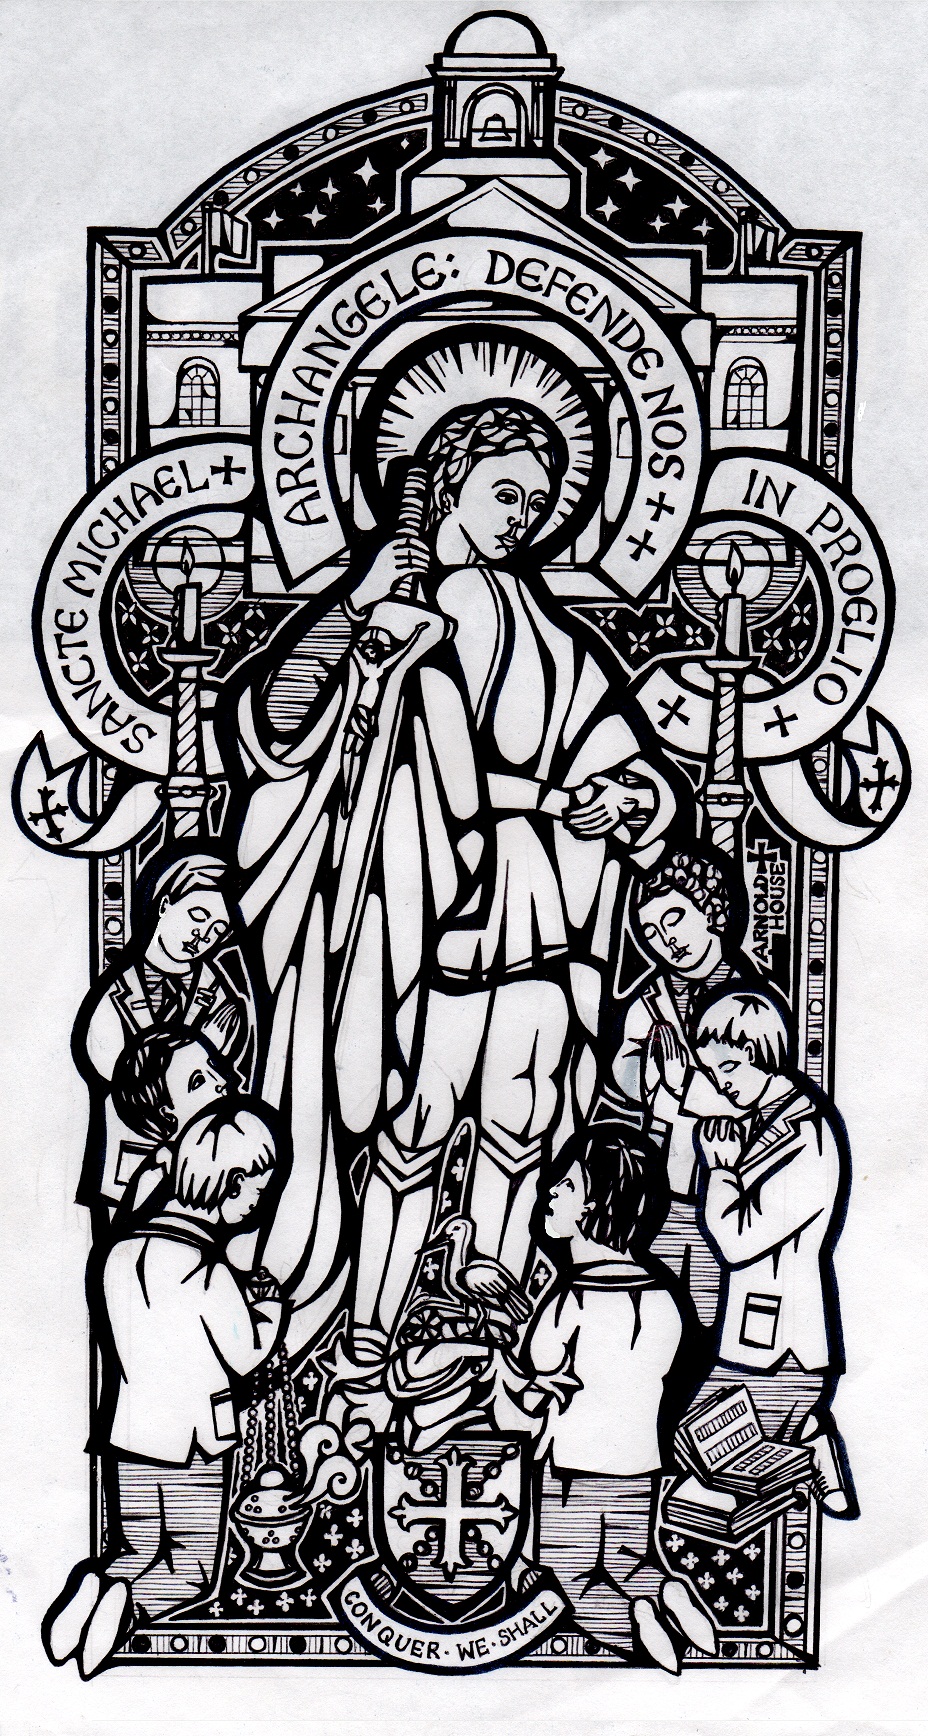 St michael clipart - Clipground